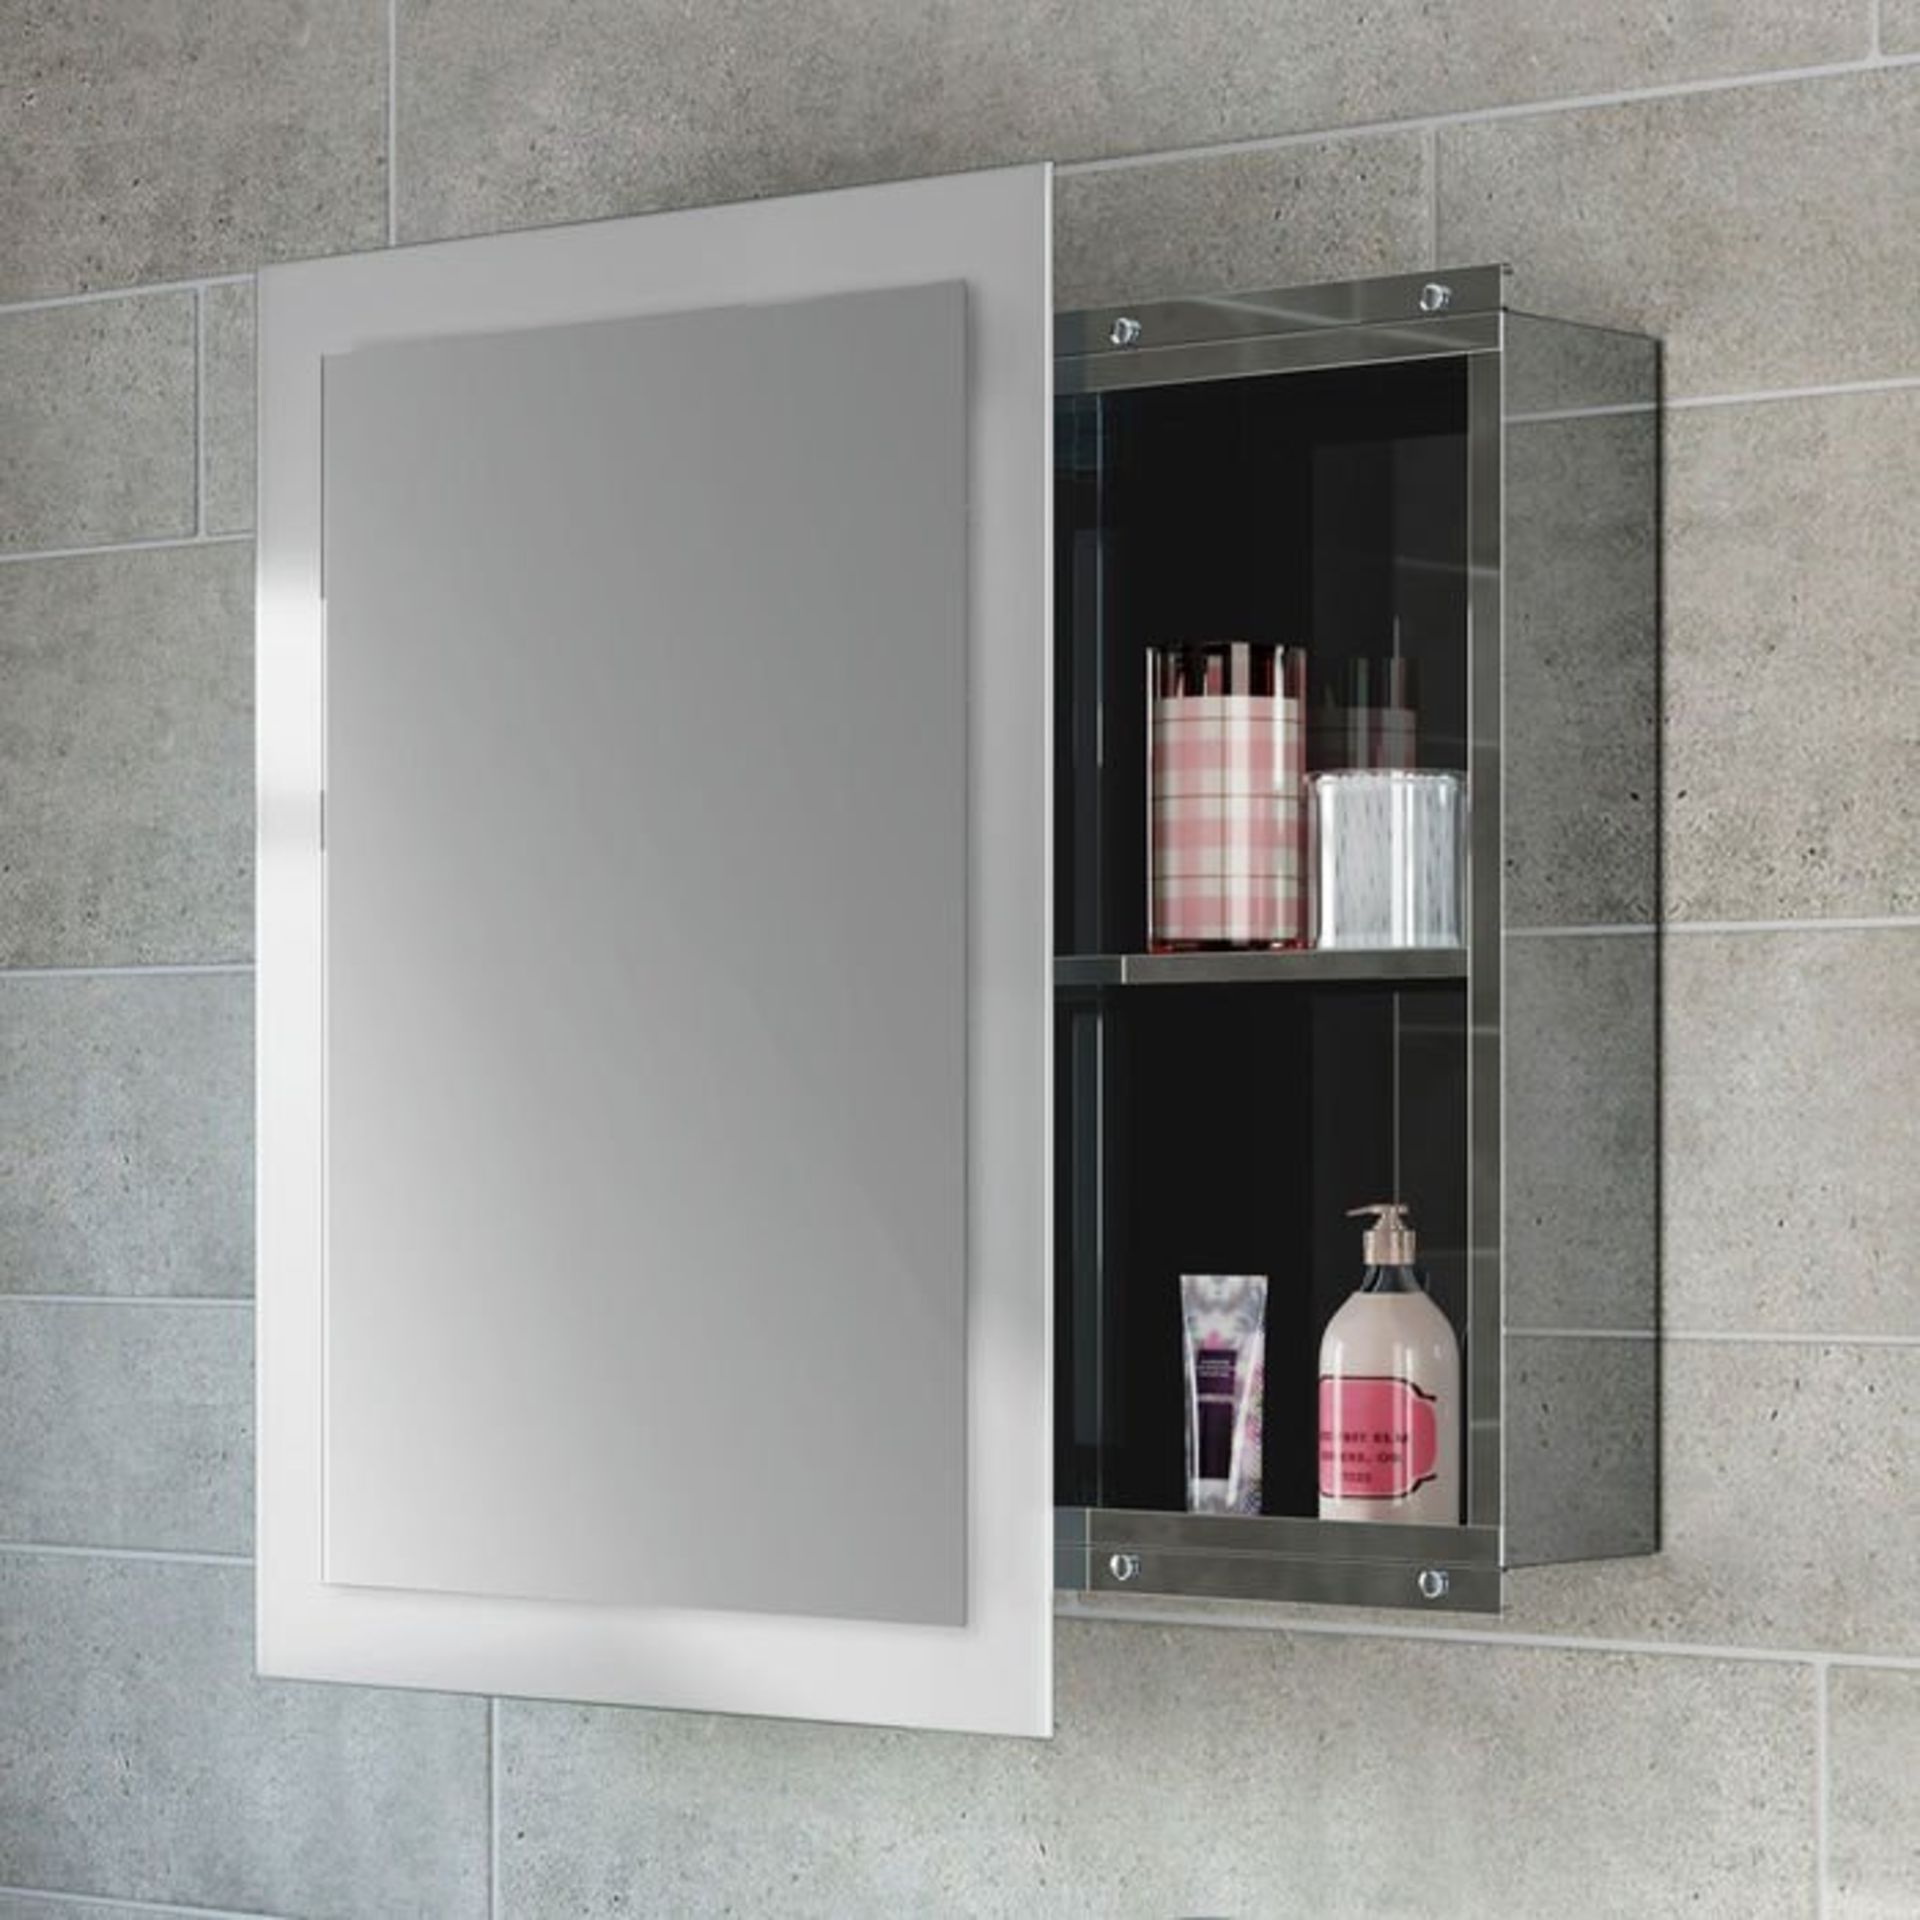 (Z118) 480x660 Frosted Sliding Door Liberty Stainless Steel Mirror Cabinet. Made from high-grade - Image 2 of 3